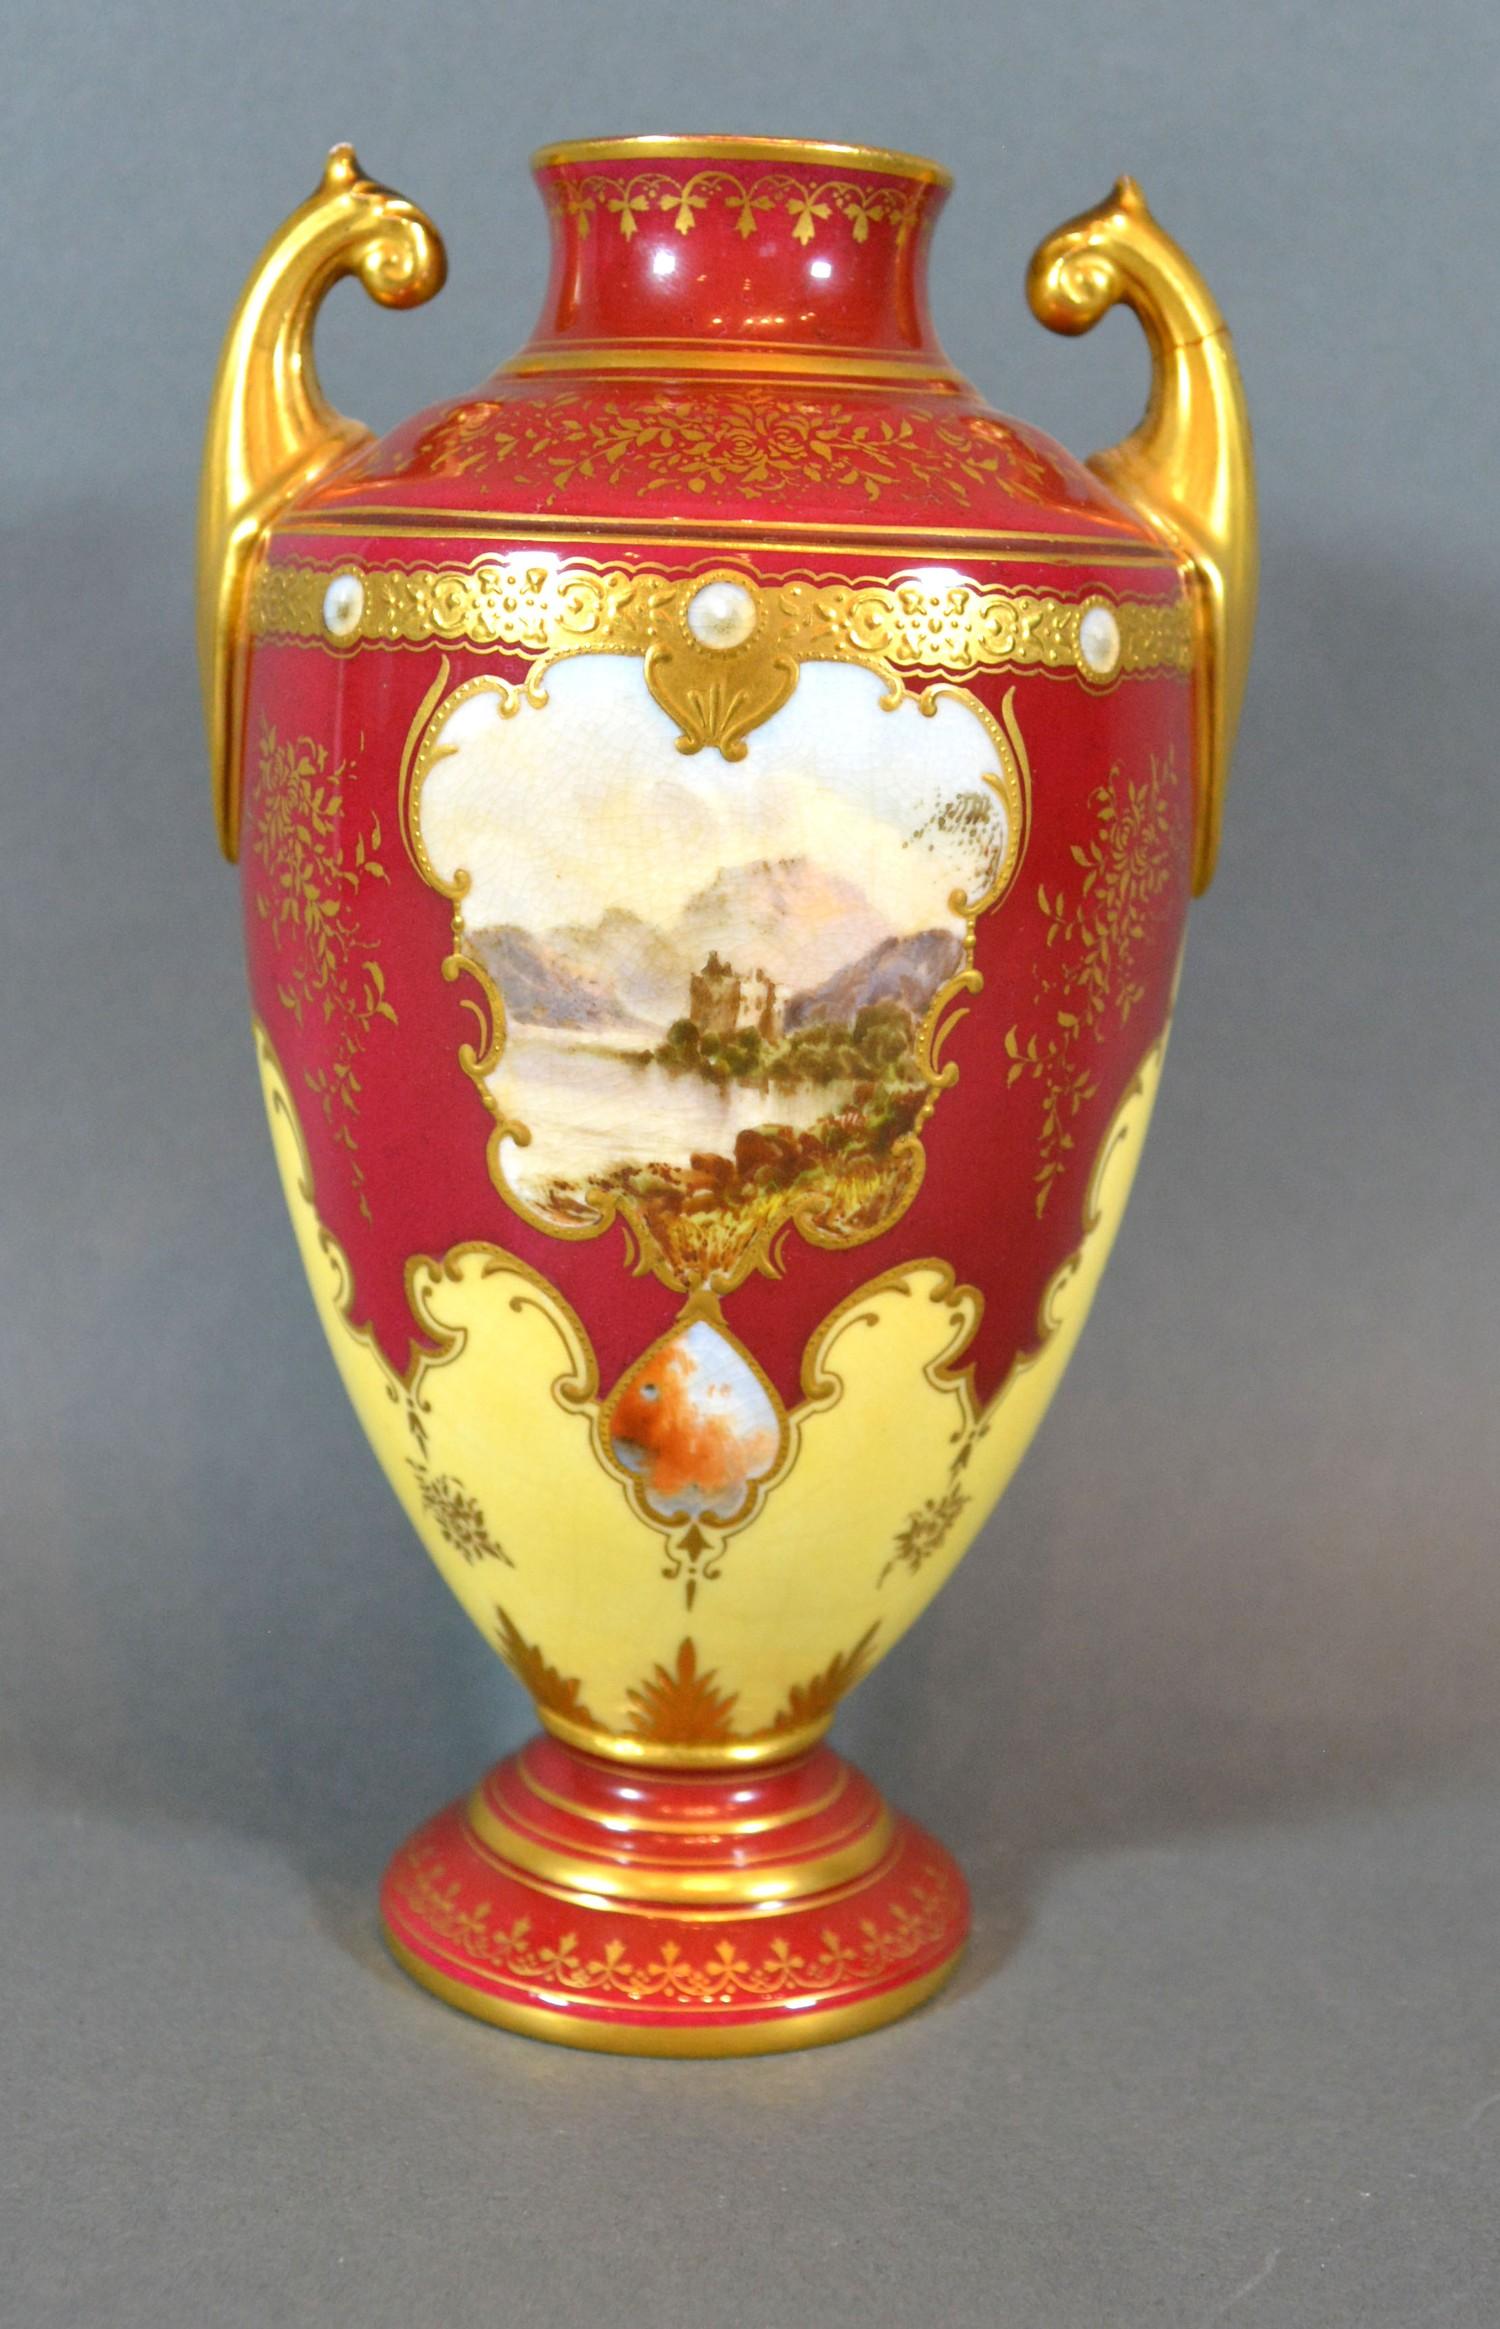 A Coalport Porcelain Two Handled Vase hand painted with a reserve upon a red and cream ground